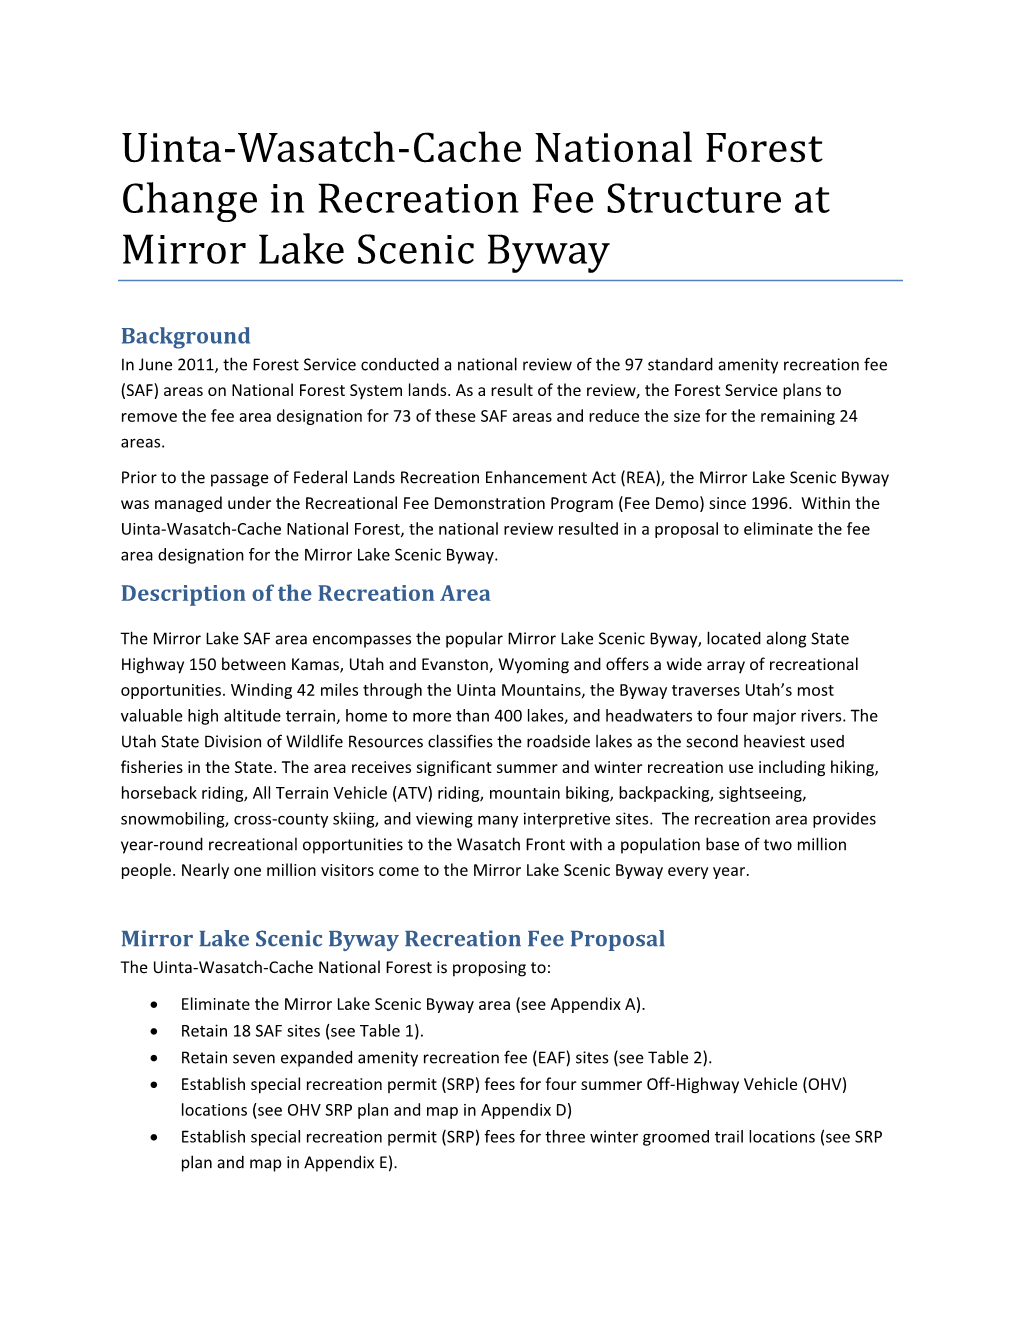 Uinta‐Wasatch‐Cache National Forest Change in Recreation Fee Structure at Mirror Lake Scenic Byway